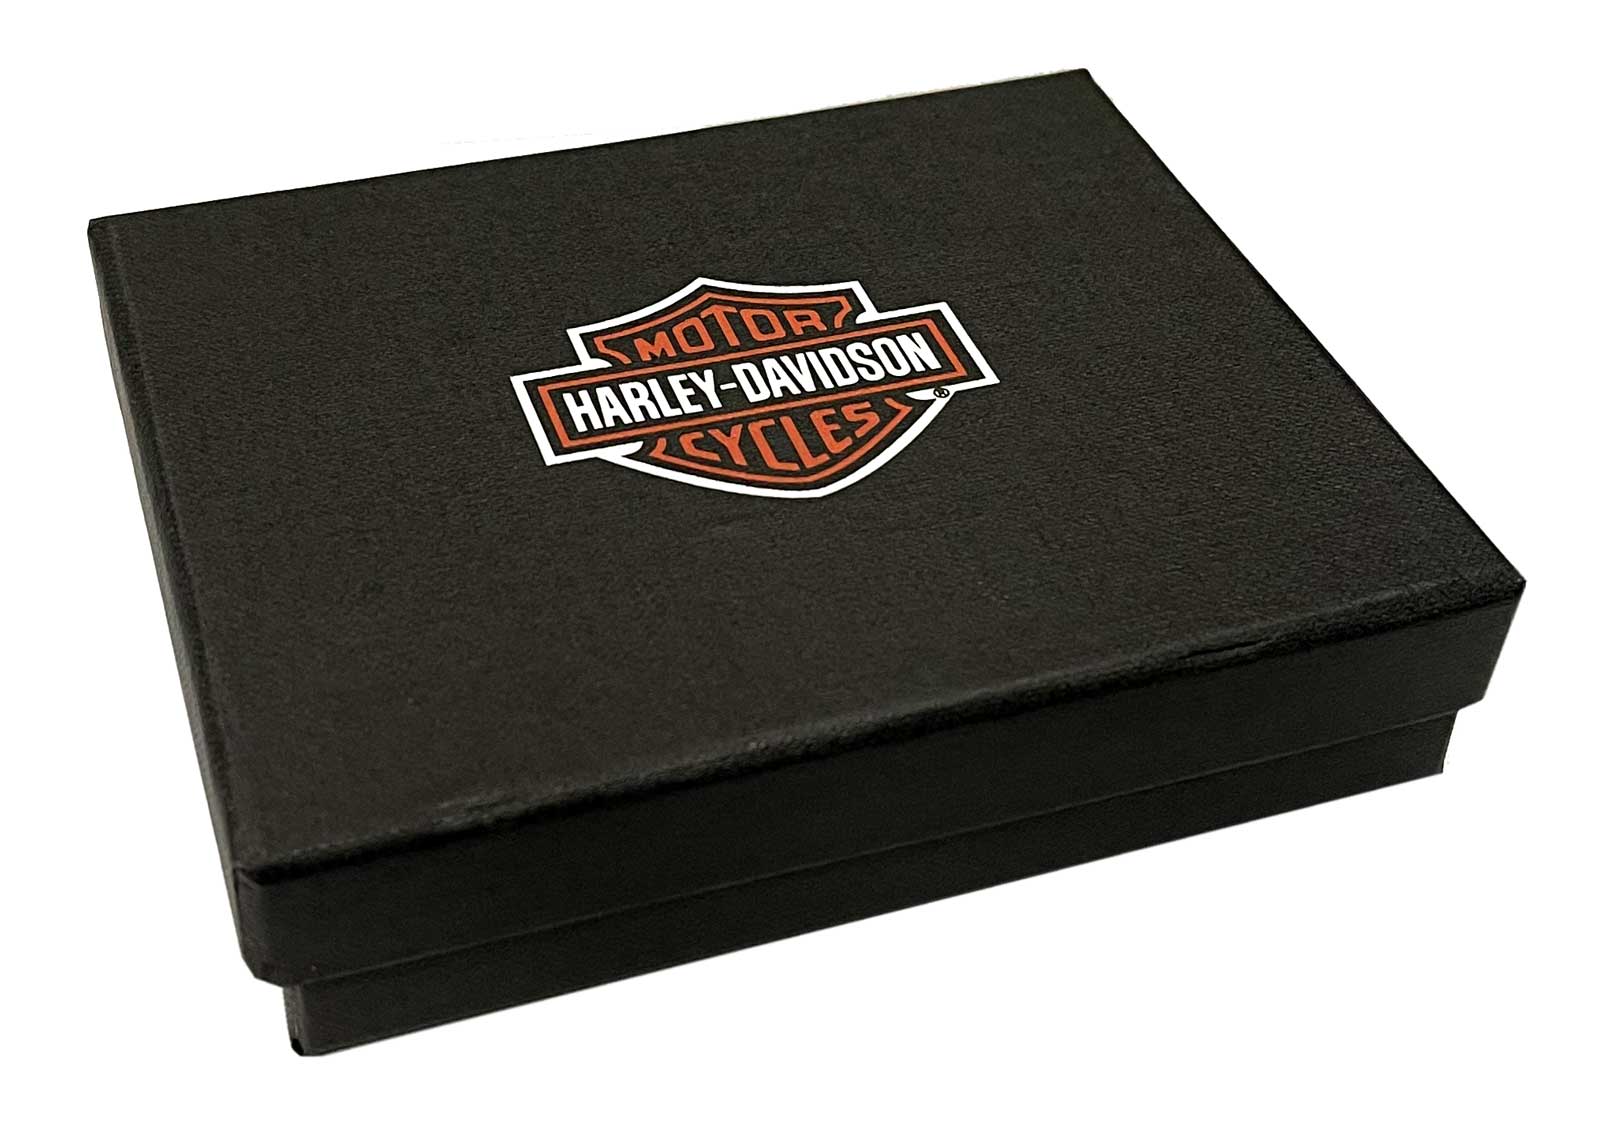 Evergreen NCAA Louisville Cardinals Black Leather Bifold Wallet Officially  Licensed with Gift Box